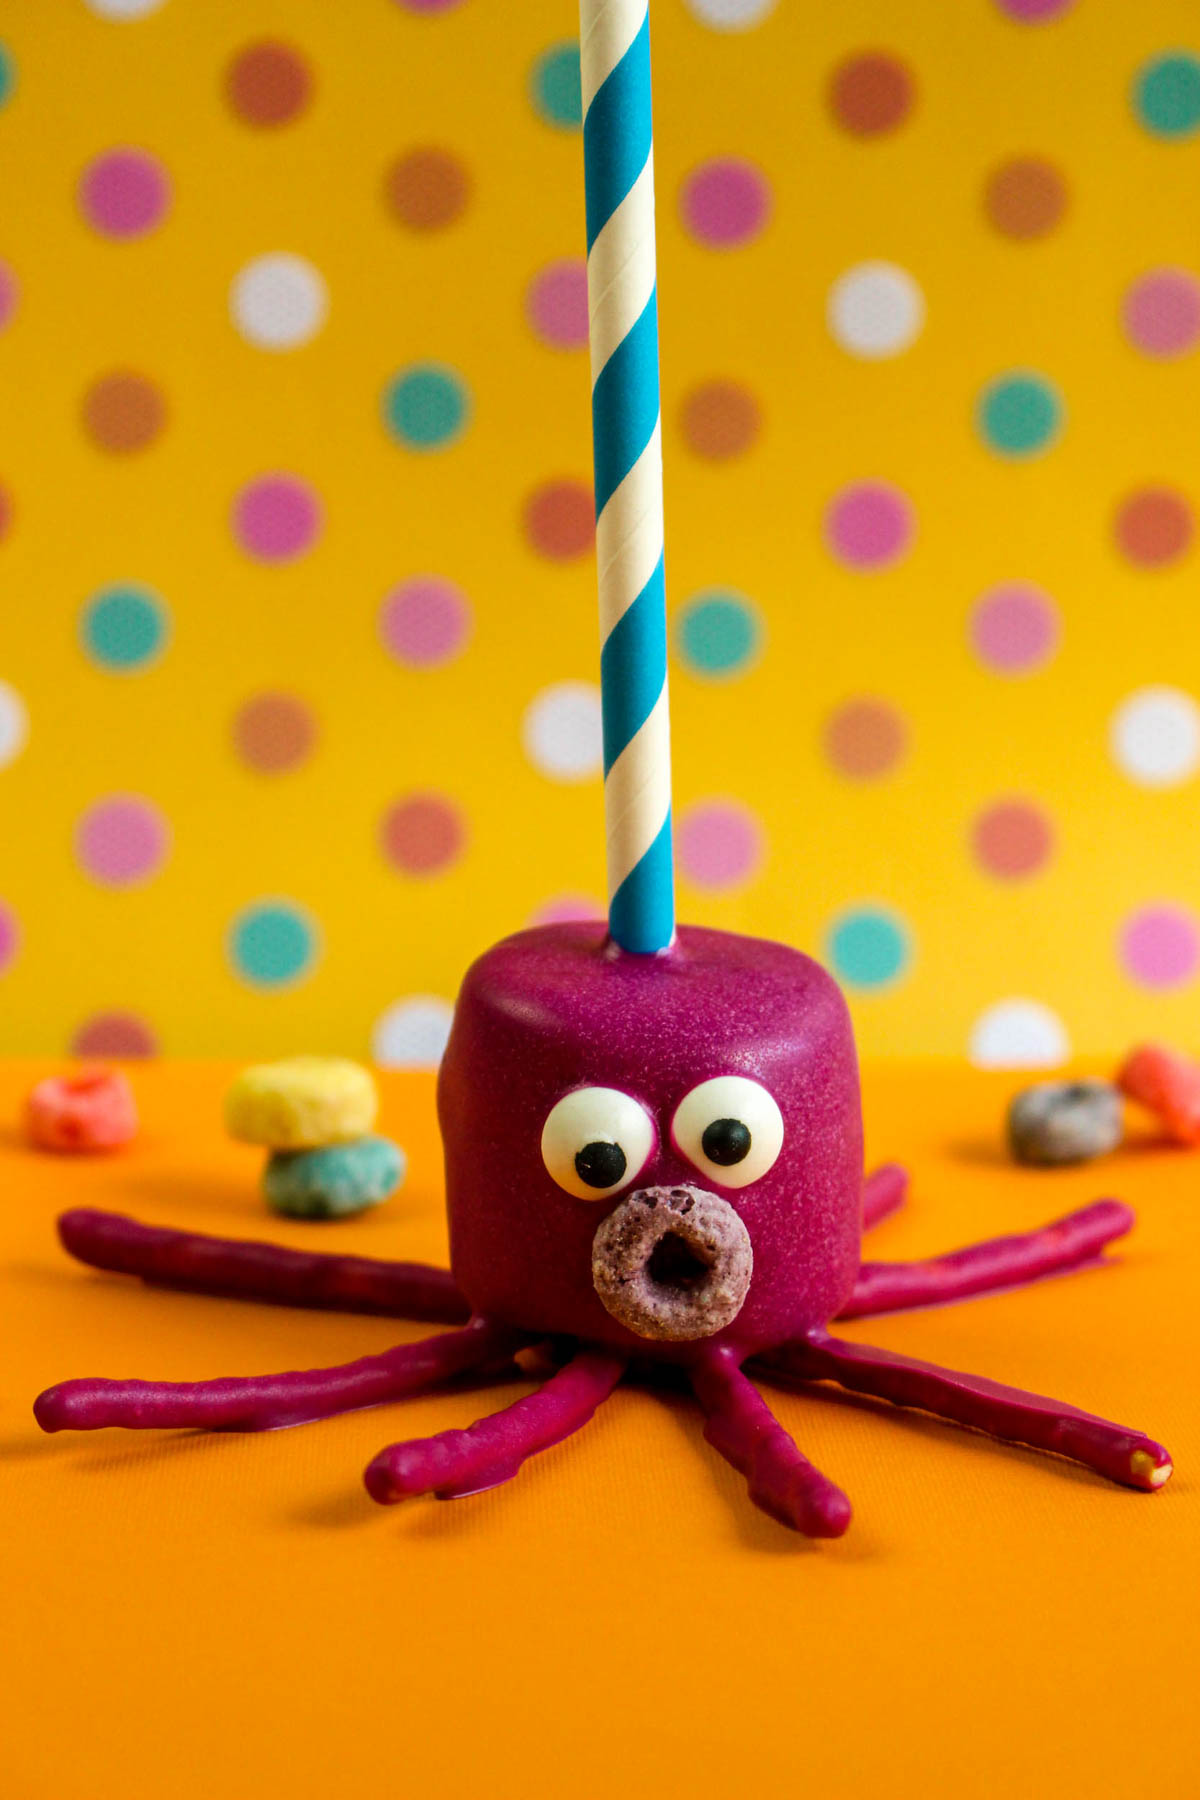 octopus marshmallow made out of a marshmallow